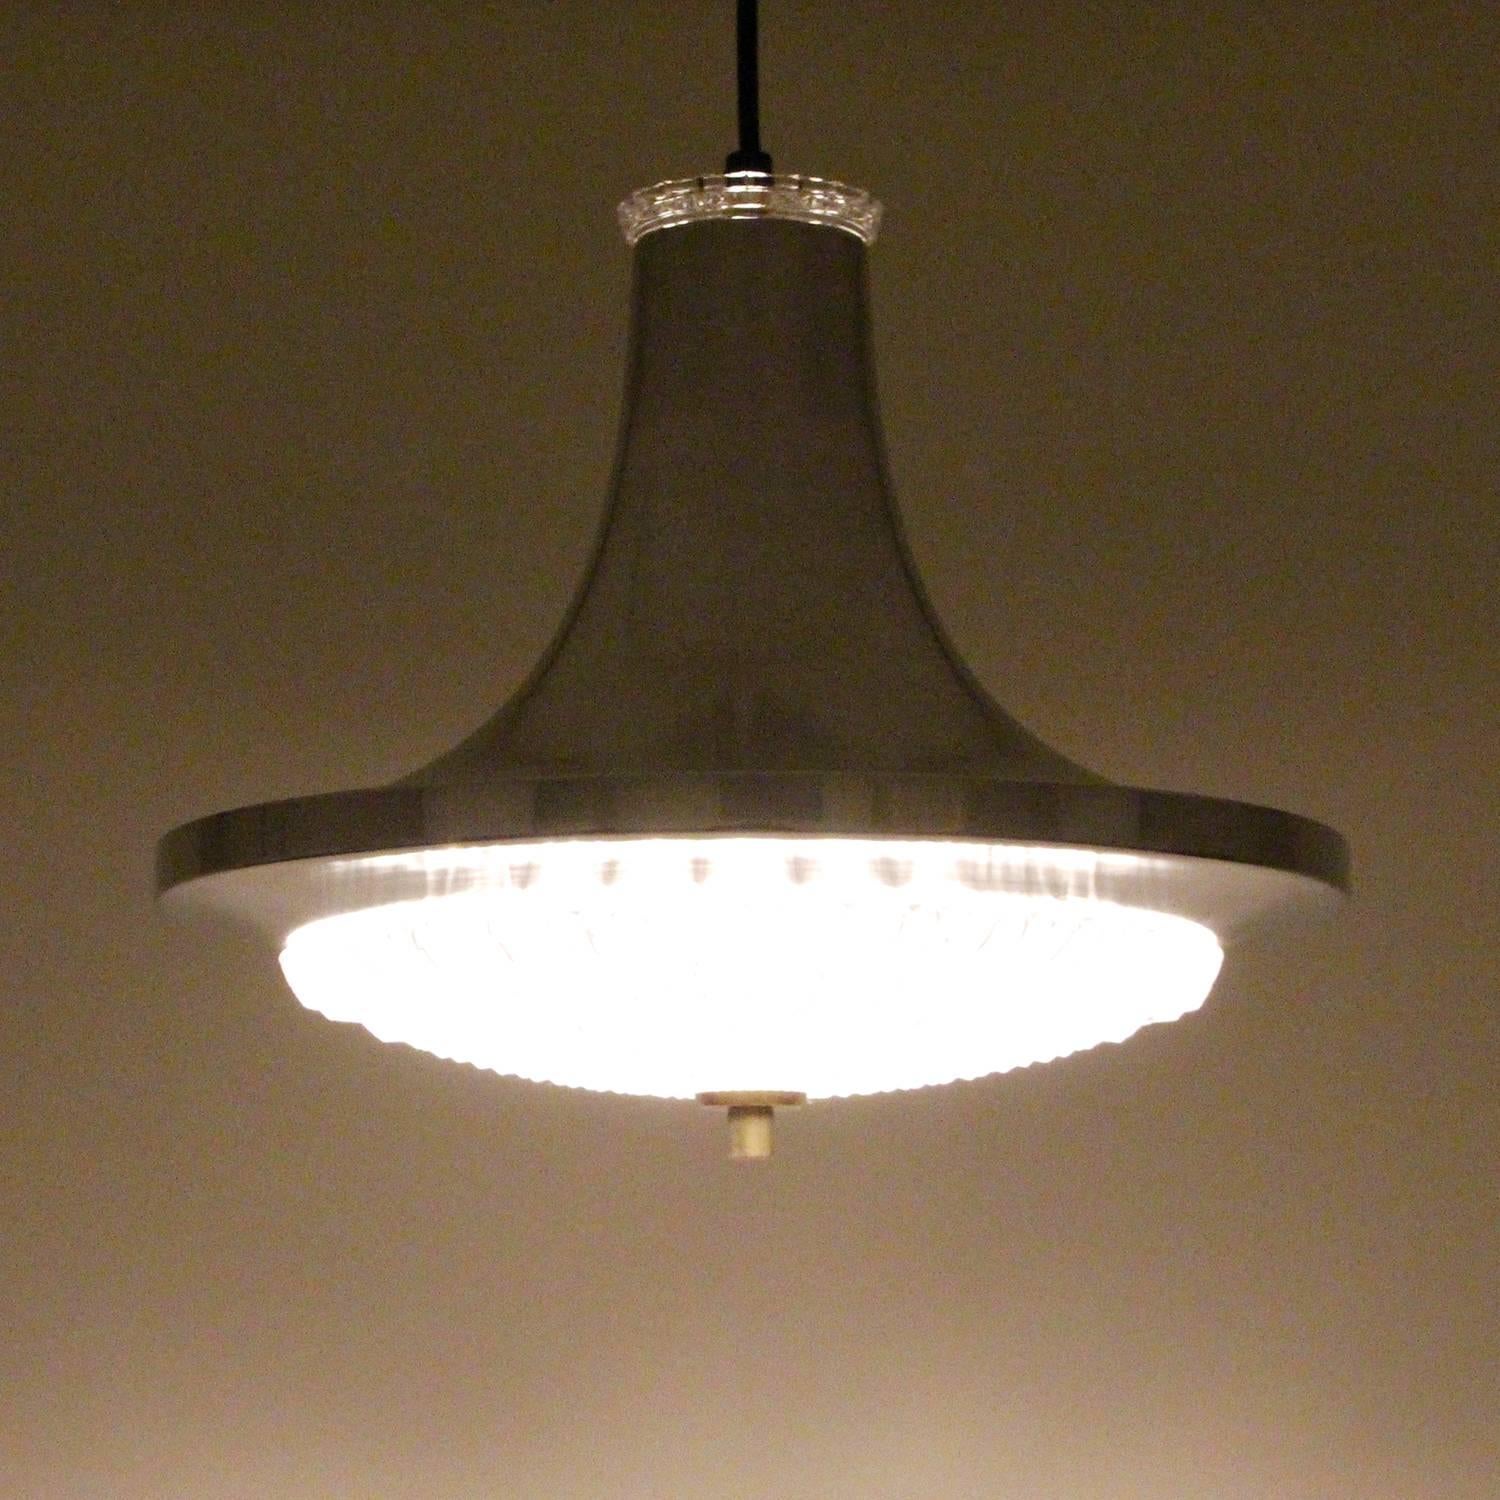 Polished Aluminum and Crystal Pendant by Vitrika, 1960s Danish Modern Ceiling Light For Sale